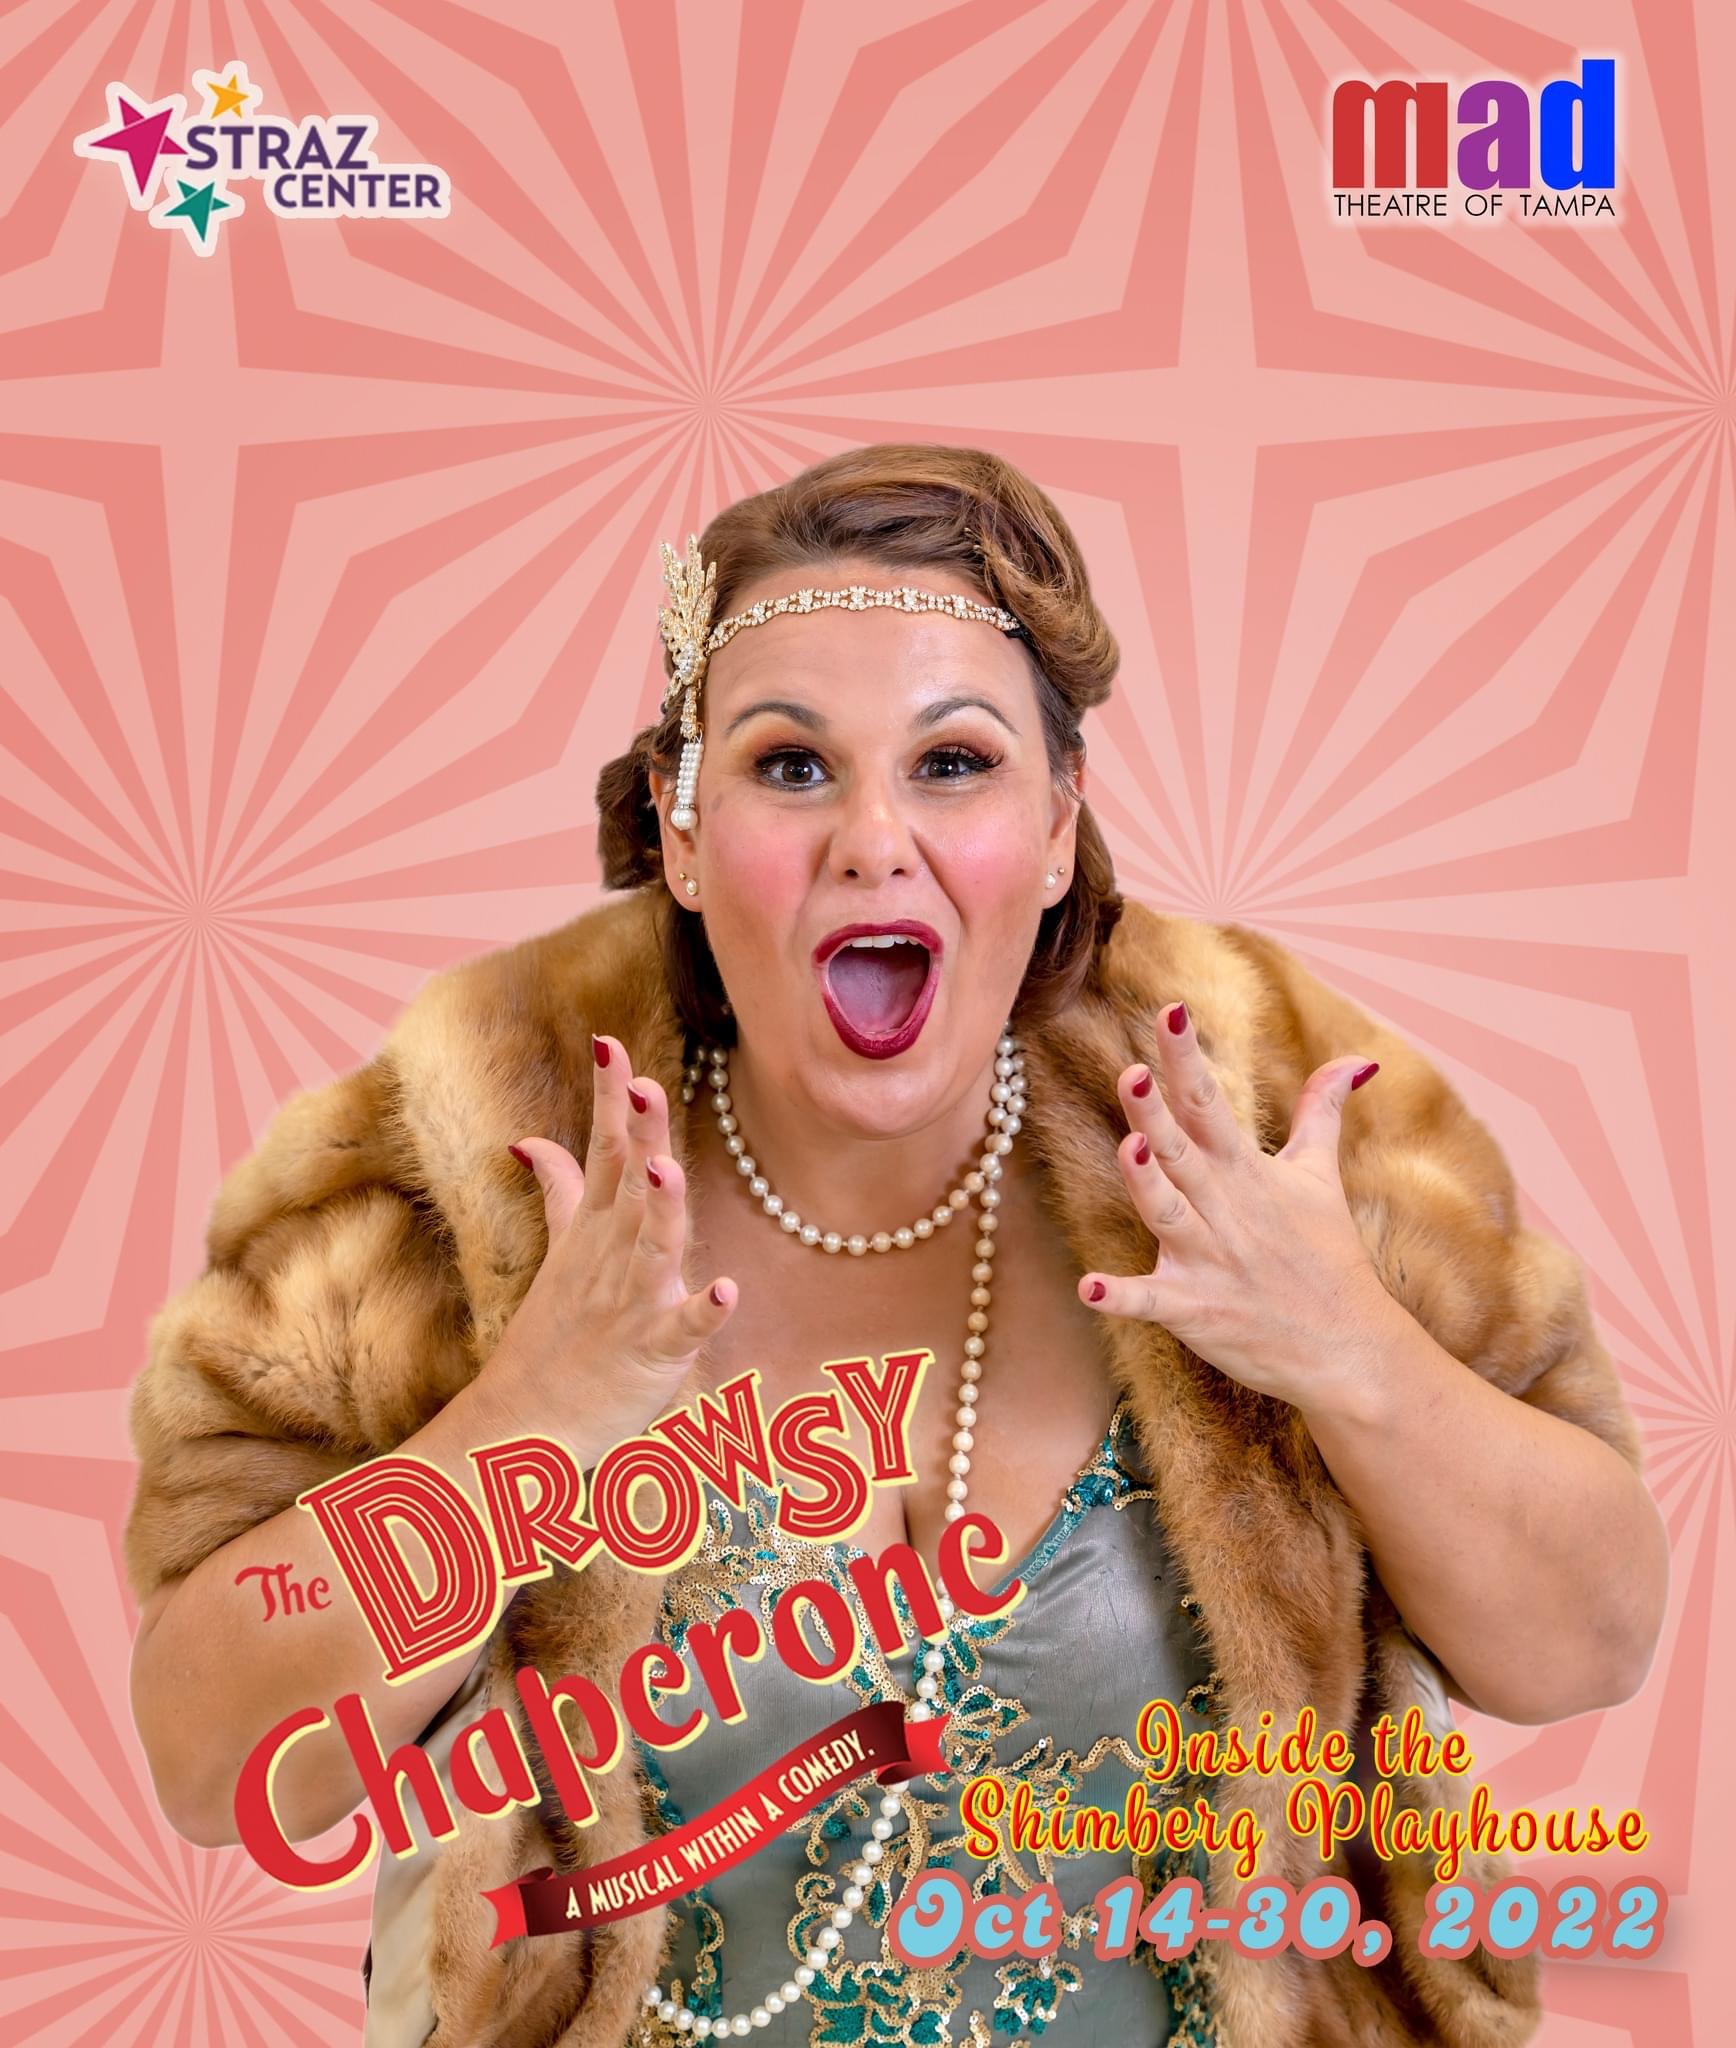 Meet Kitty as played by Christen Preziosi in mad Theatre of Tampa’s “The Drowsy Chaperone